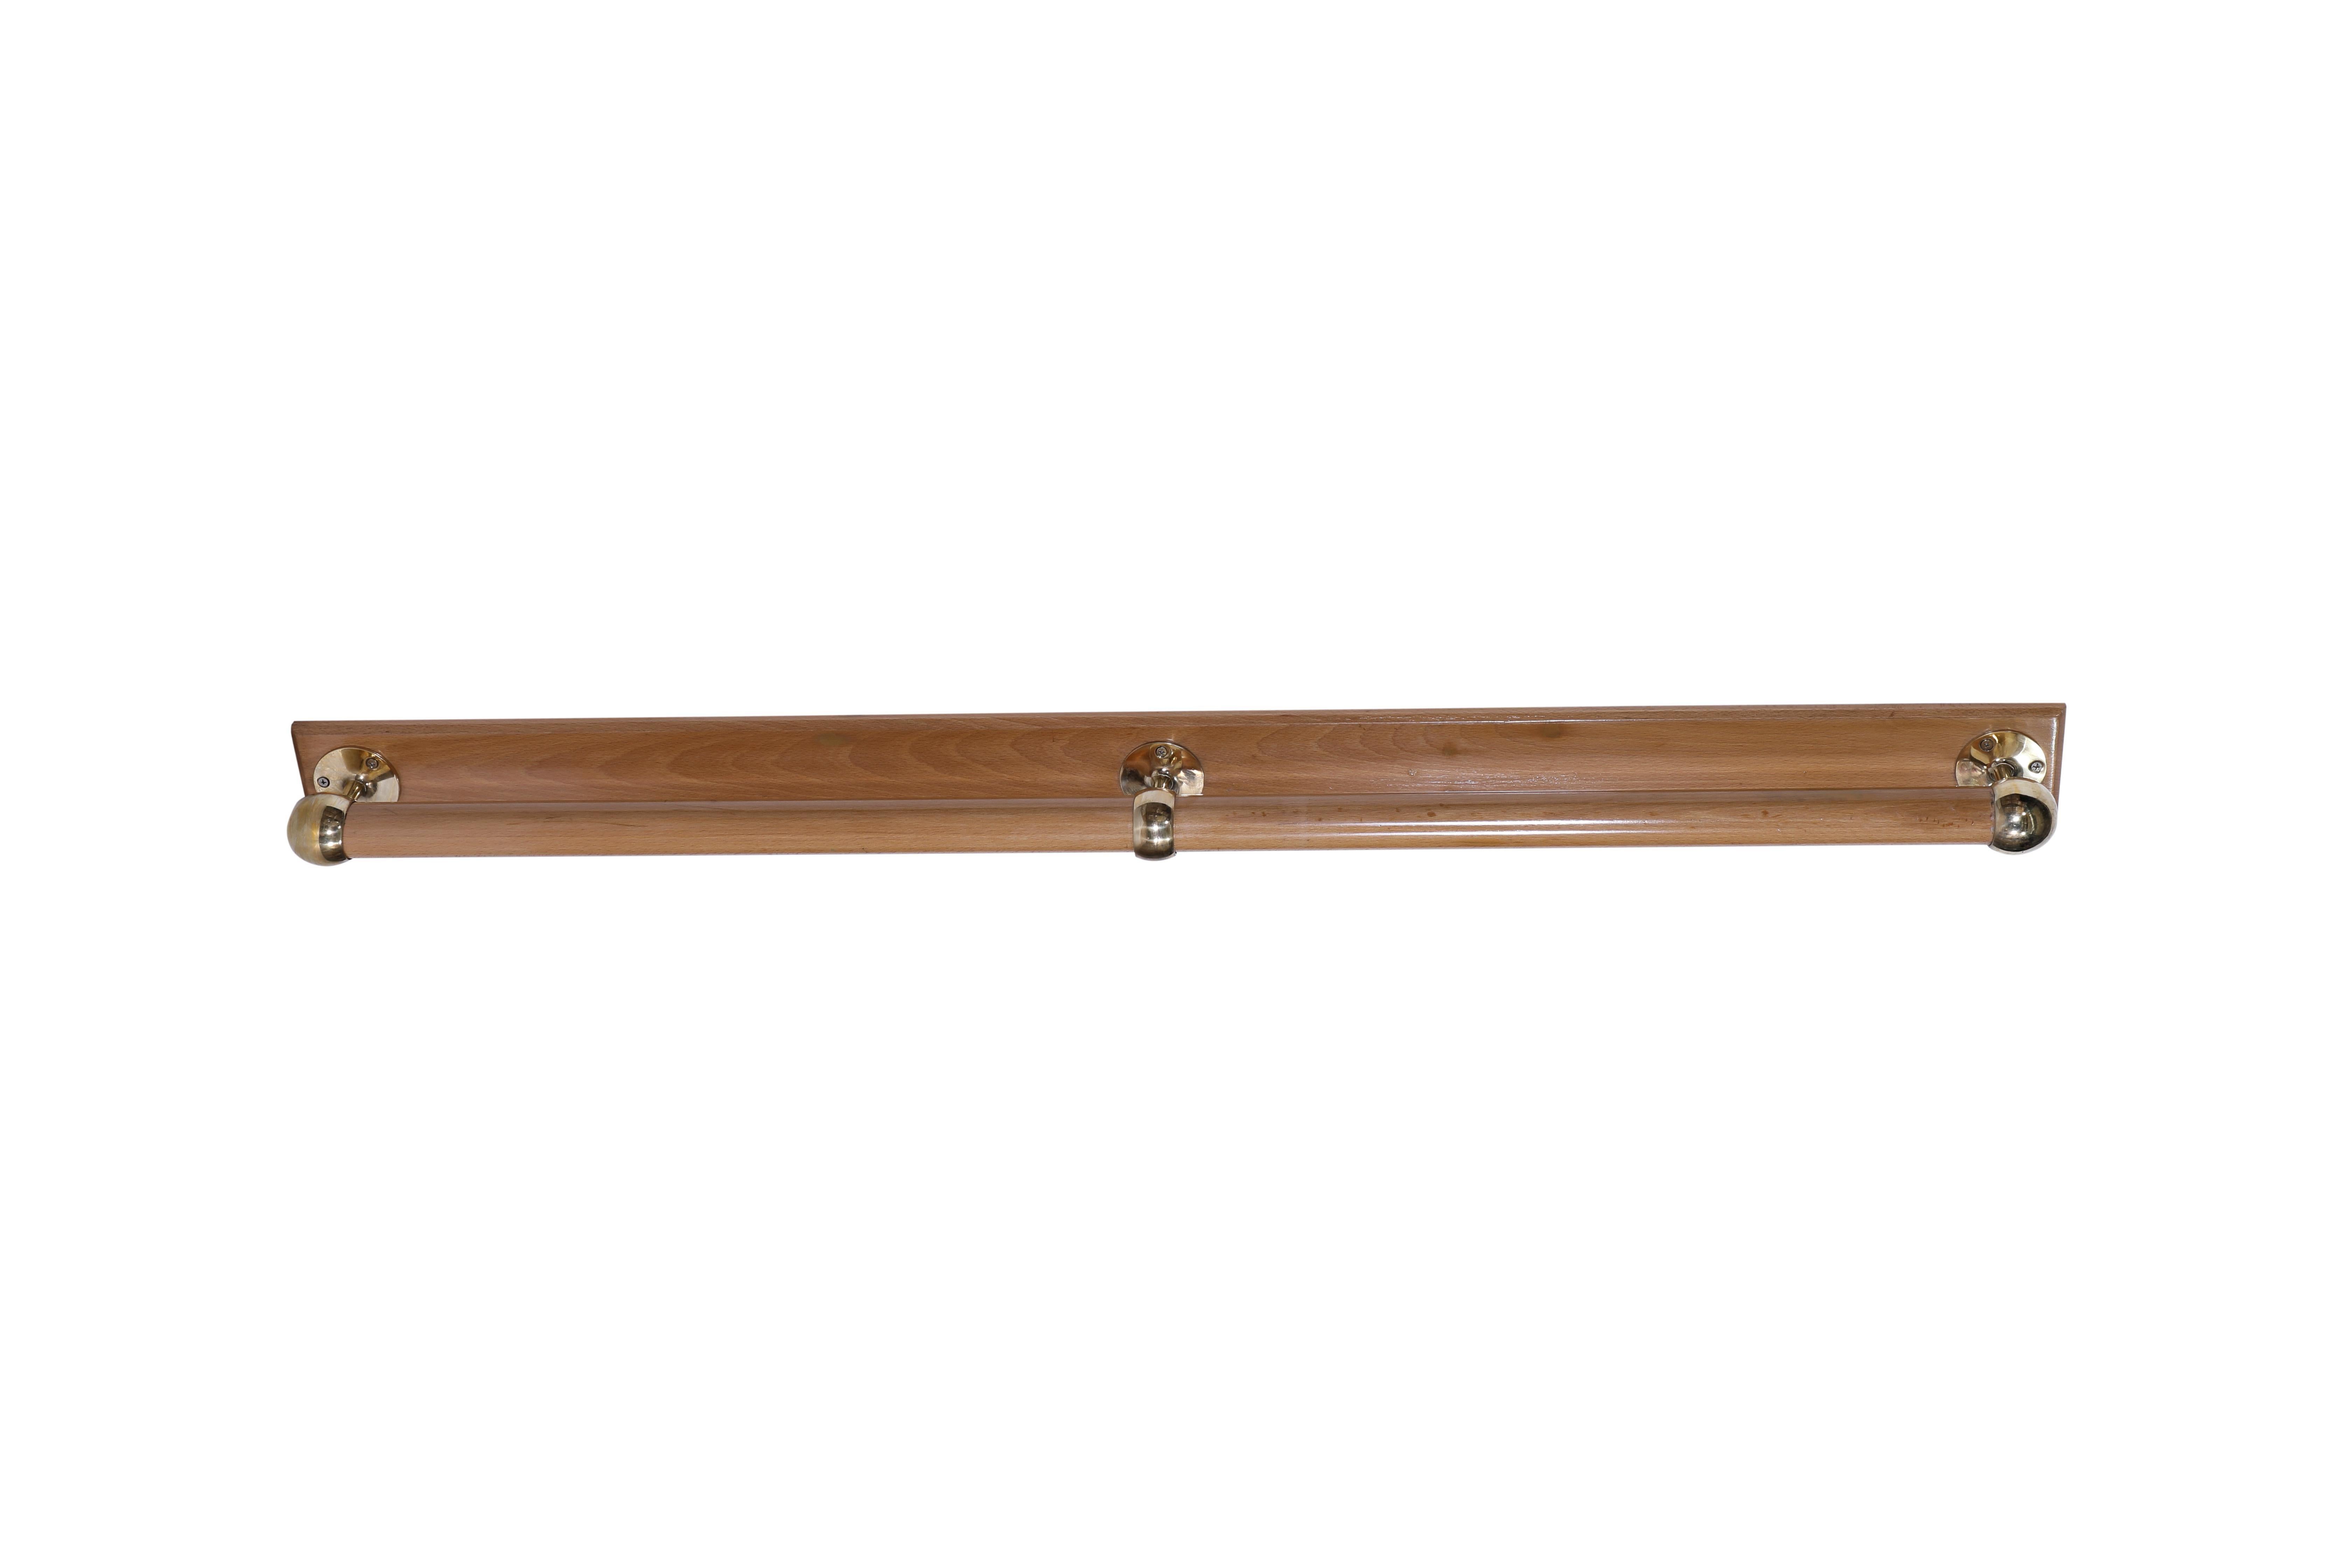 A group of teak hand rails on teak backplates with brass hardware.  As of this writing there are at least 6 pieces in this 4 1/2' length.  There is also one that is 6.6